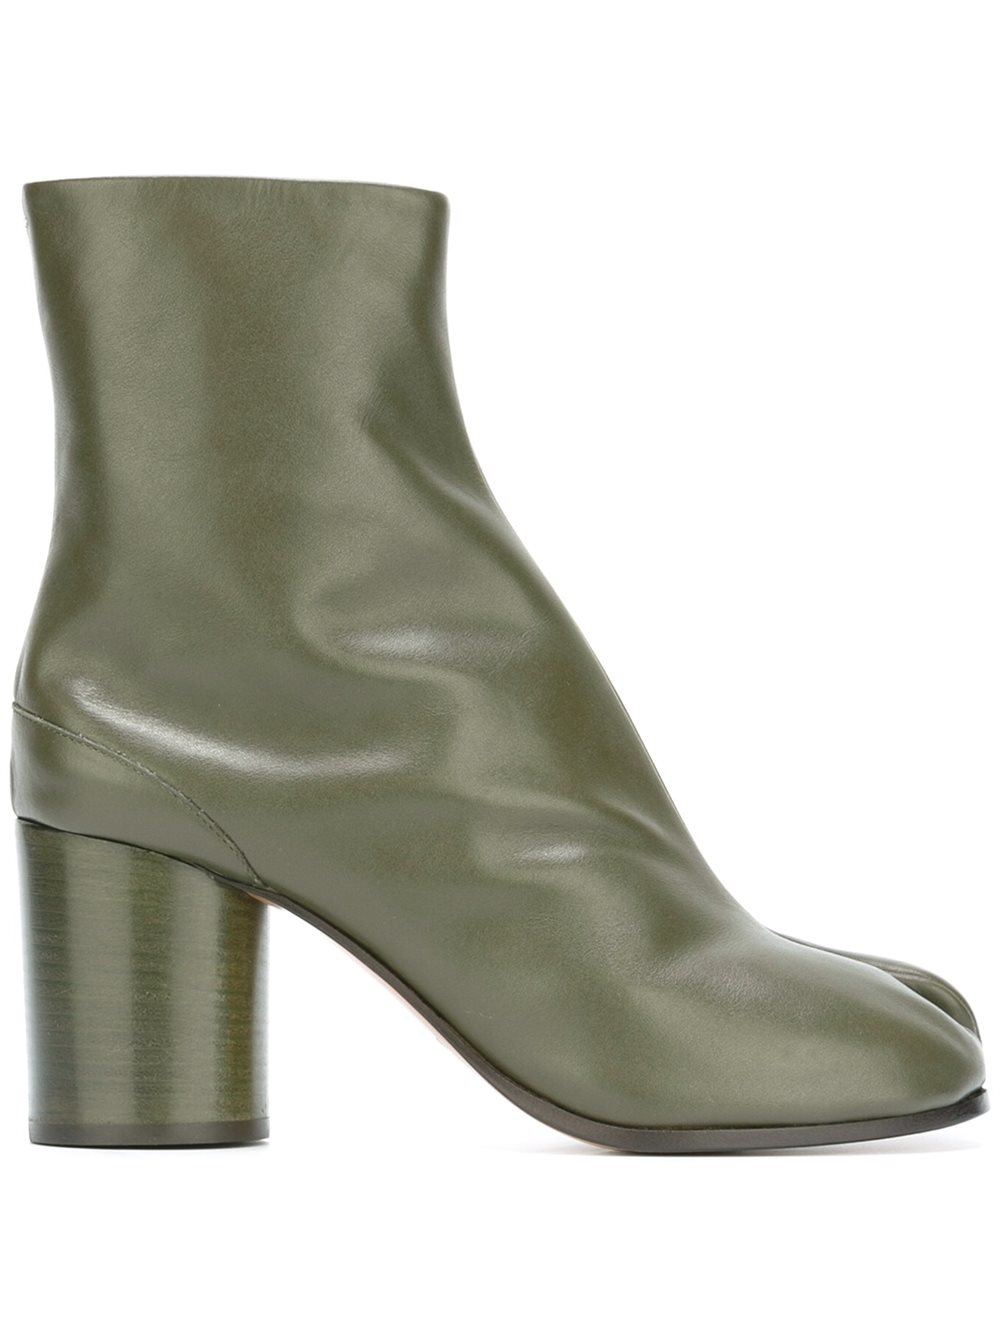 Maison margiela Tabi Leather Ankle Boots in Green | Lyst